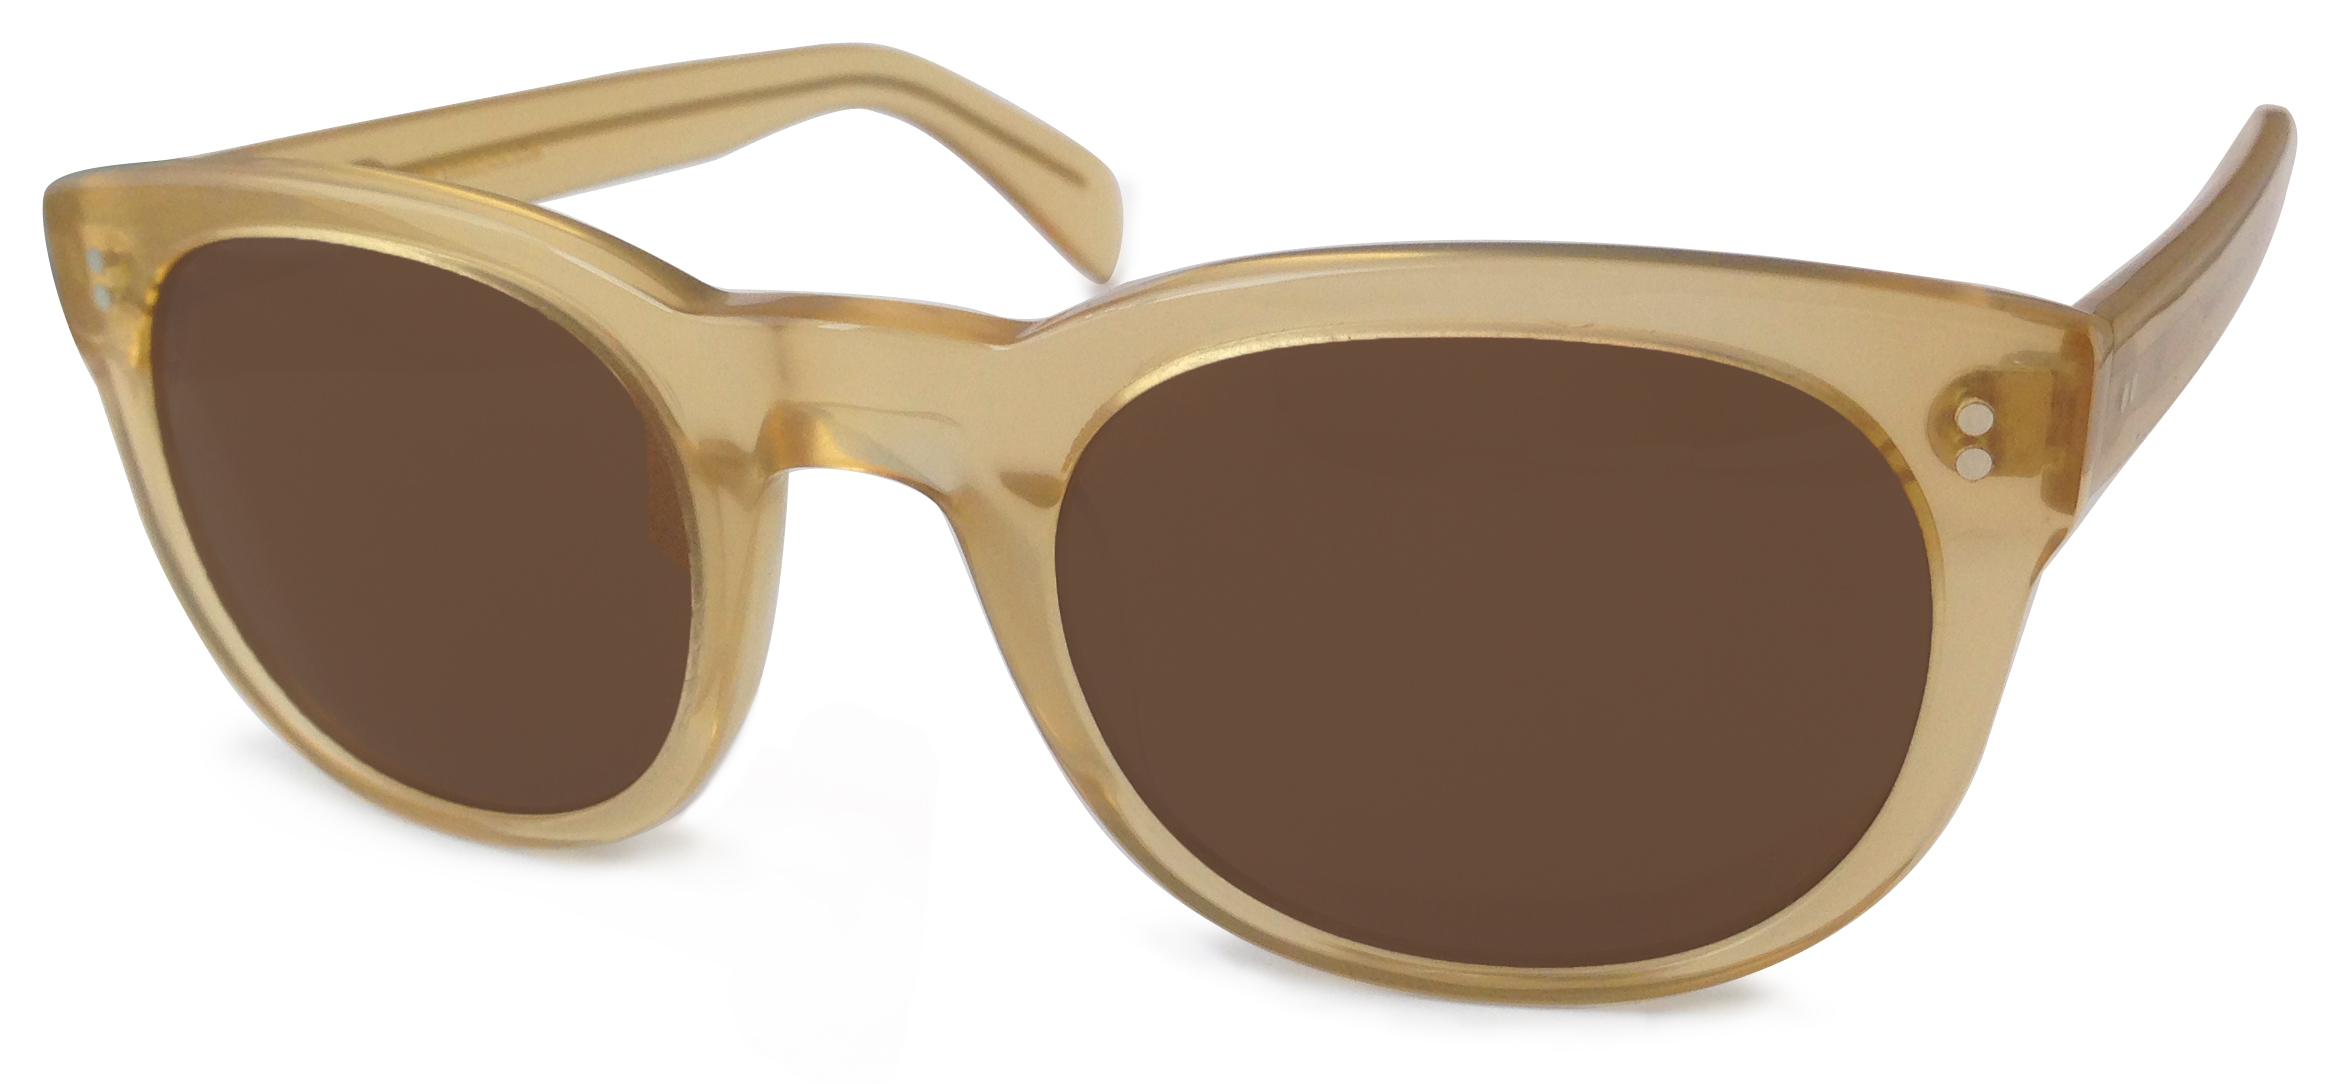 Moscot Releasing Very Limited Edition Gold Frames | Complex